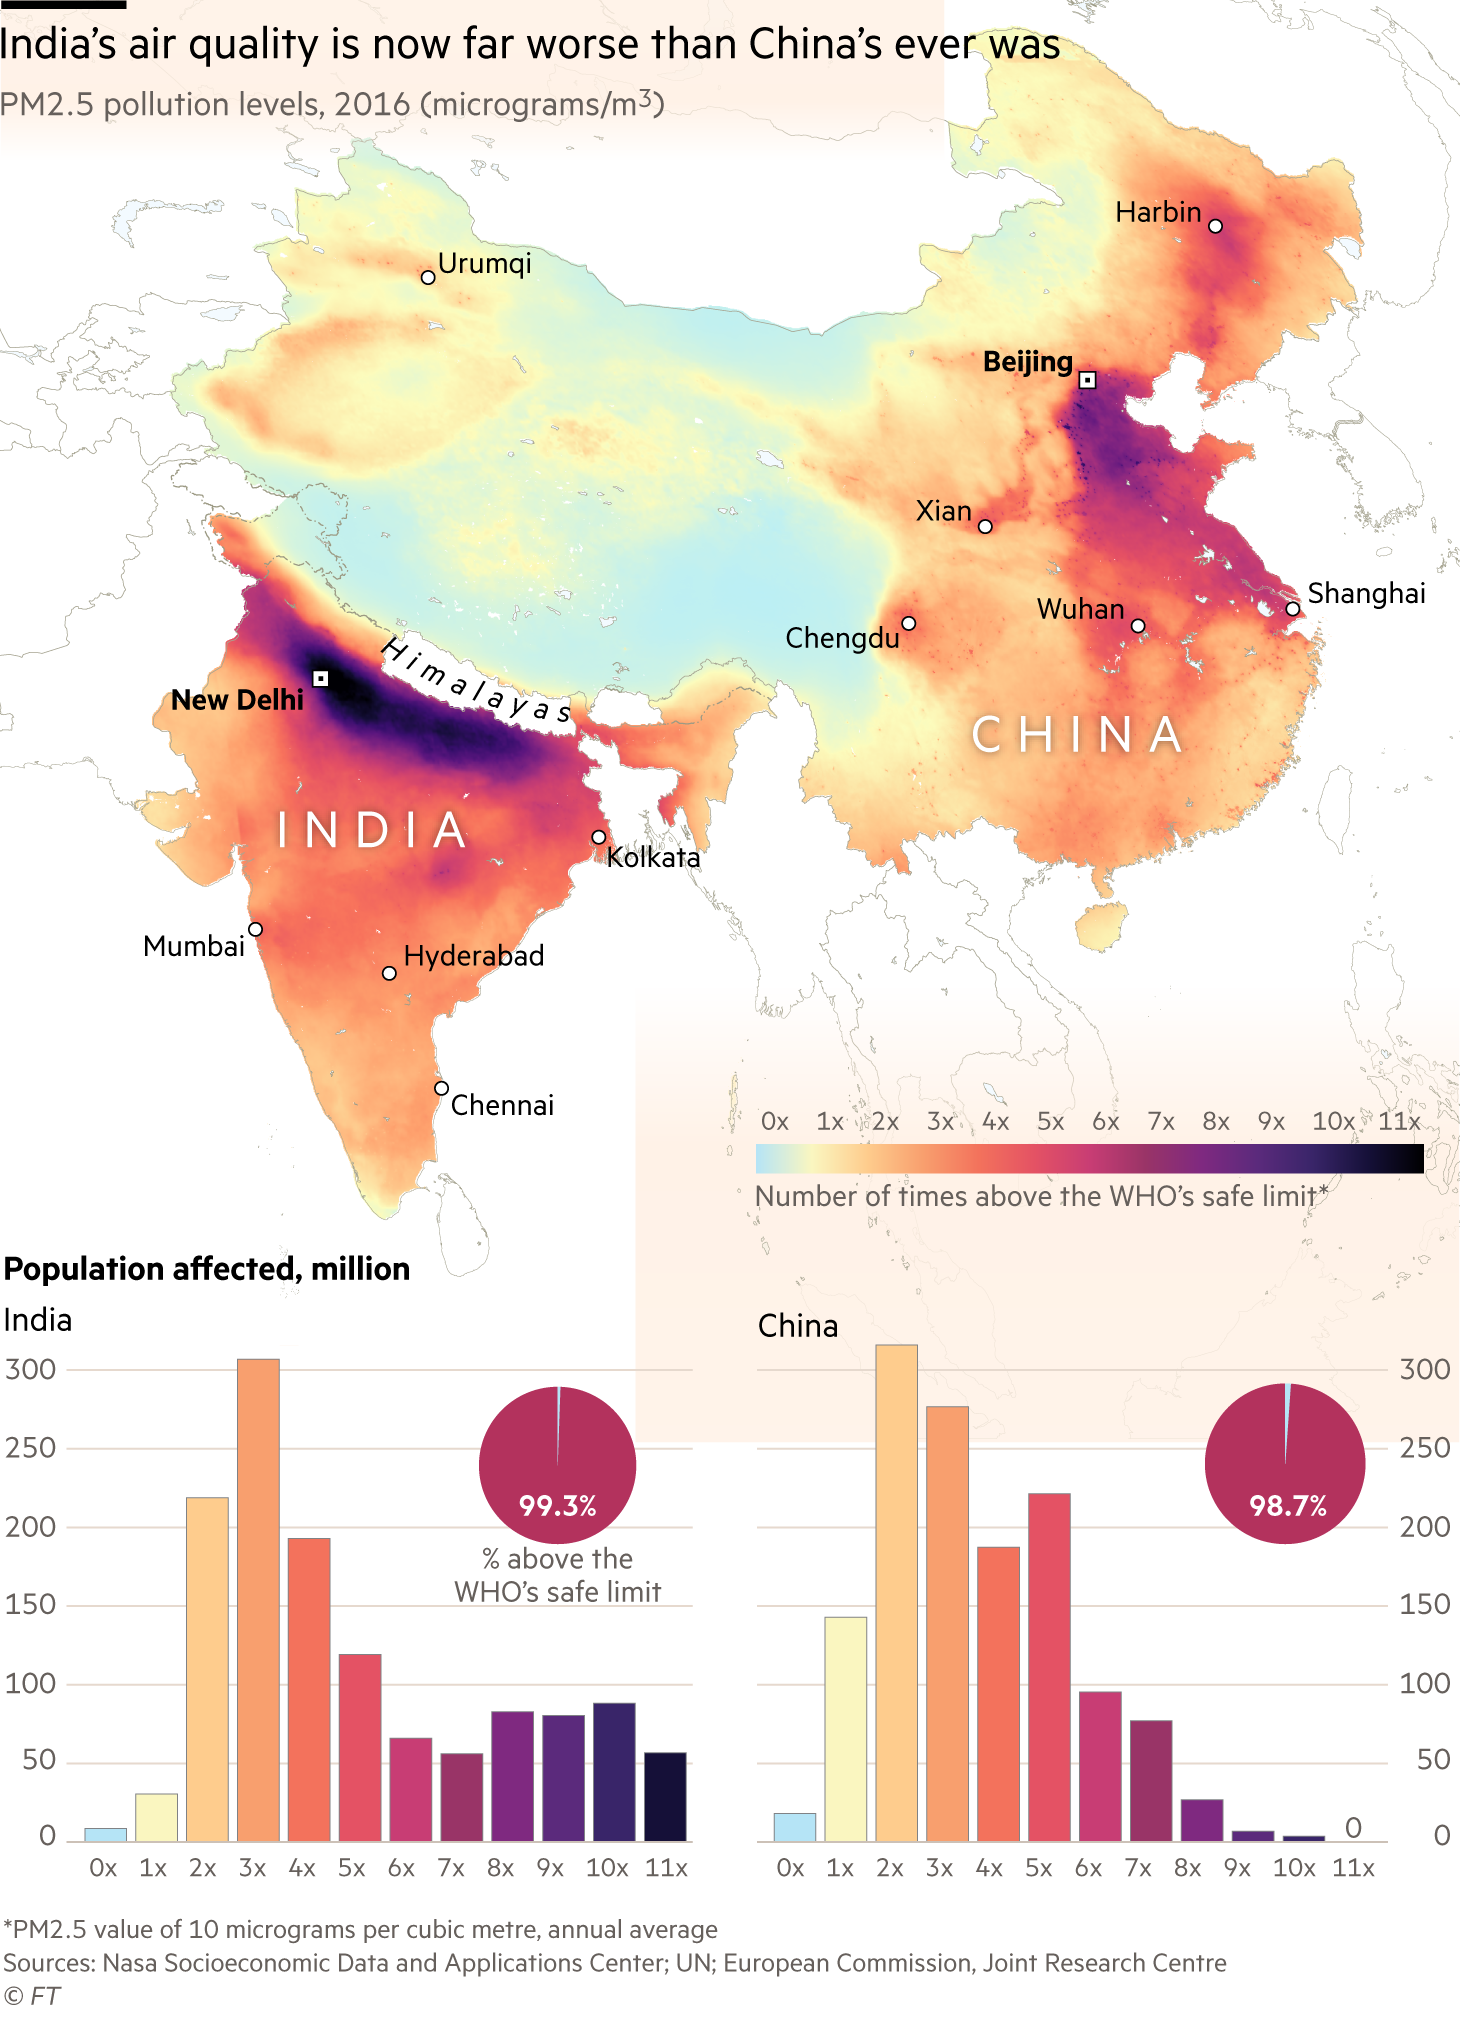 Map and charts showing India’s air quality is now far worse than China’s ever was. Although both countries have a similar number of people breathing air above the safe limit, India has far more people living in heavily polluted areas. A staggering 140 million people alone breathe air 10 times or more over the WHO safe limit. That is more than the population of the UK and France combined